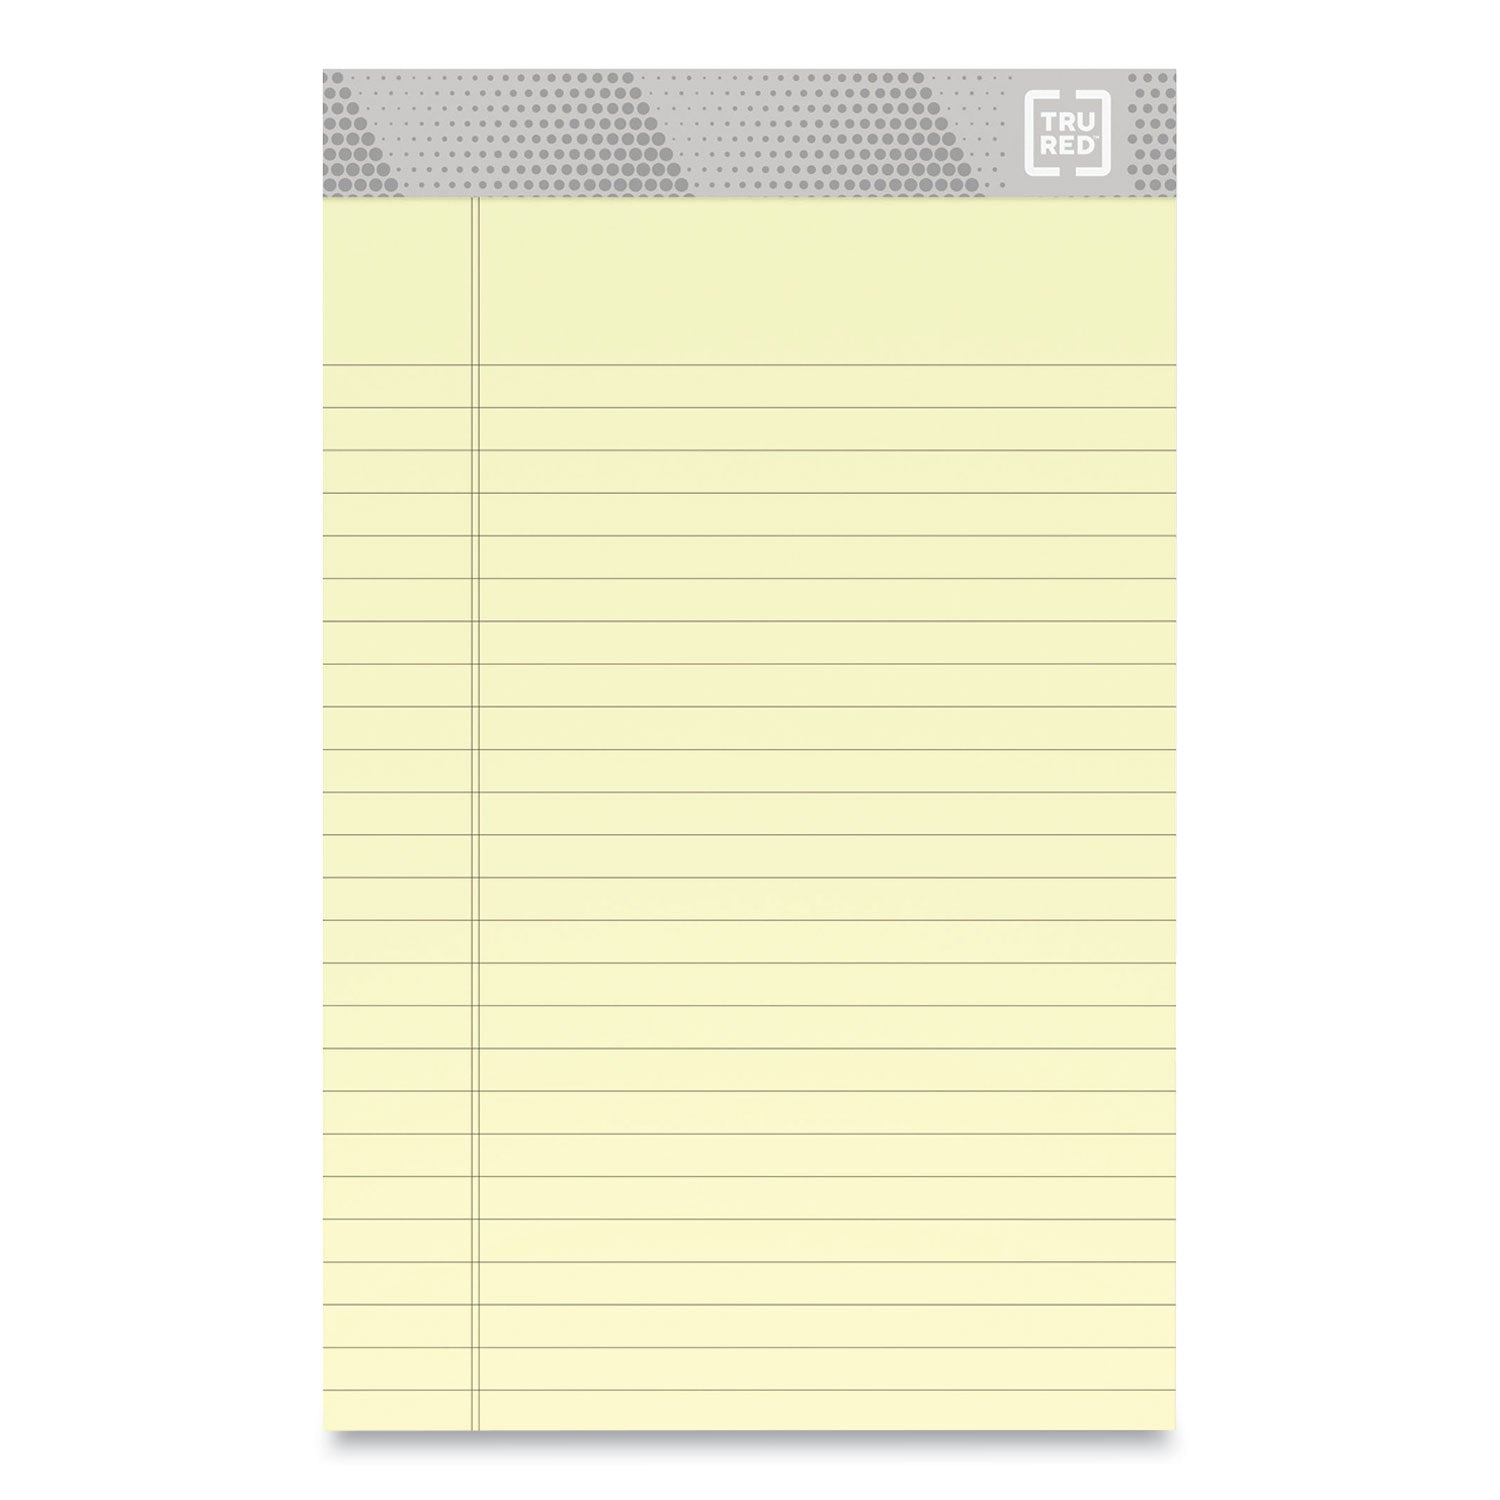 notepads-narrow-rule-50-canary-yellow-5-x-8-sheets-12-pack_tud24419916 - 2